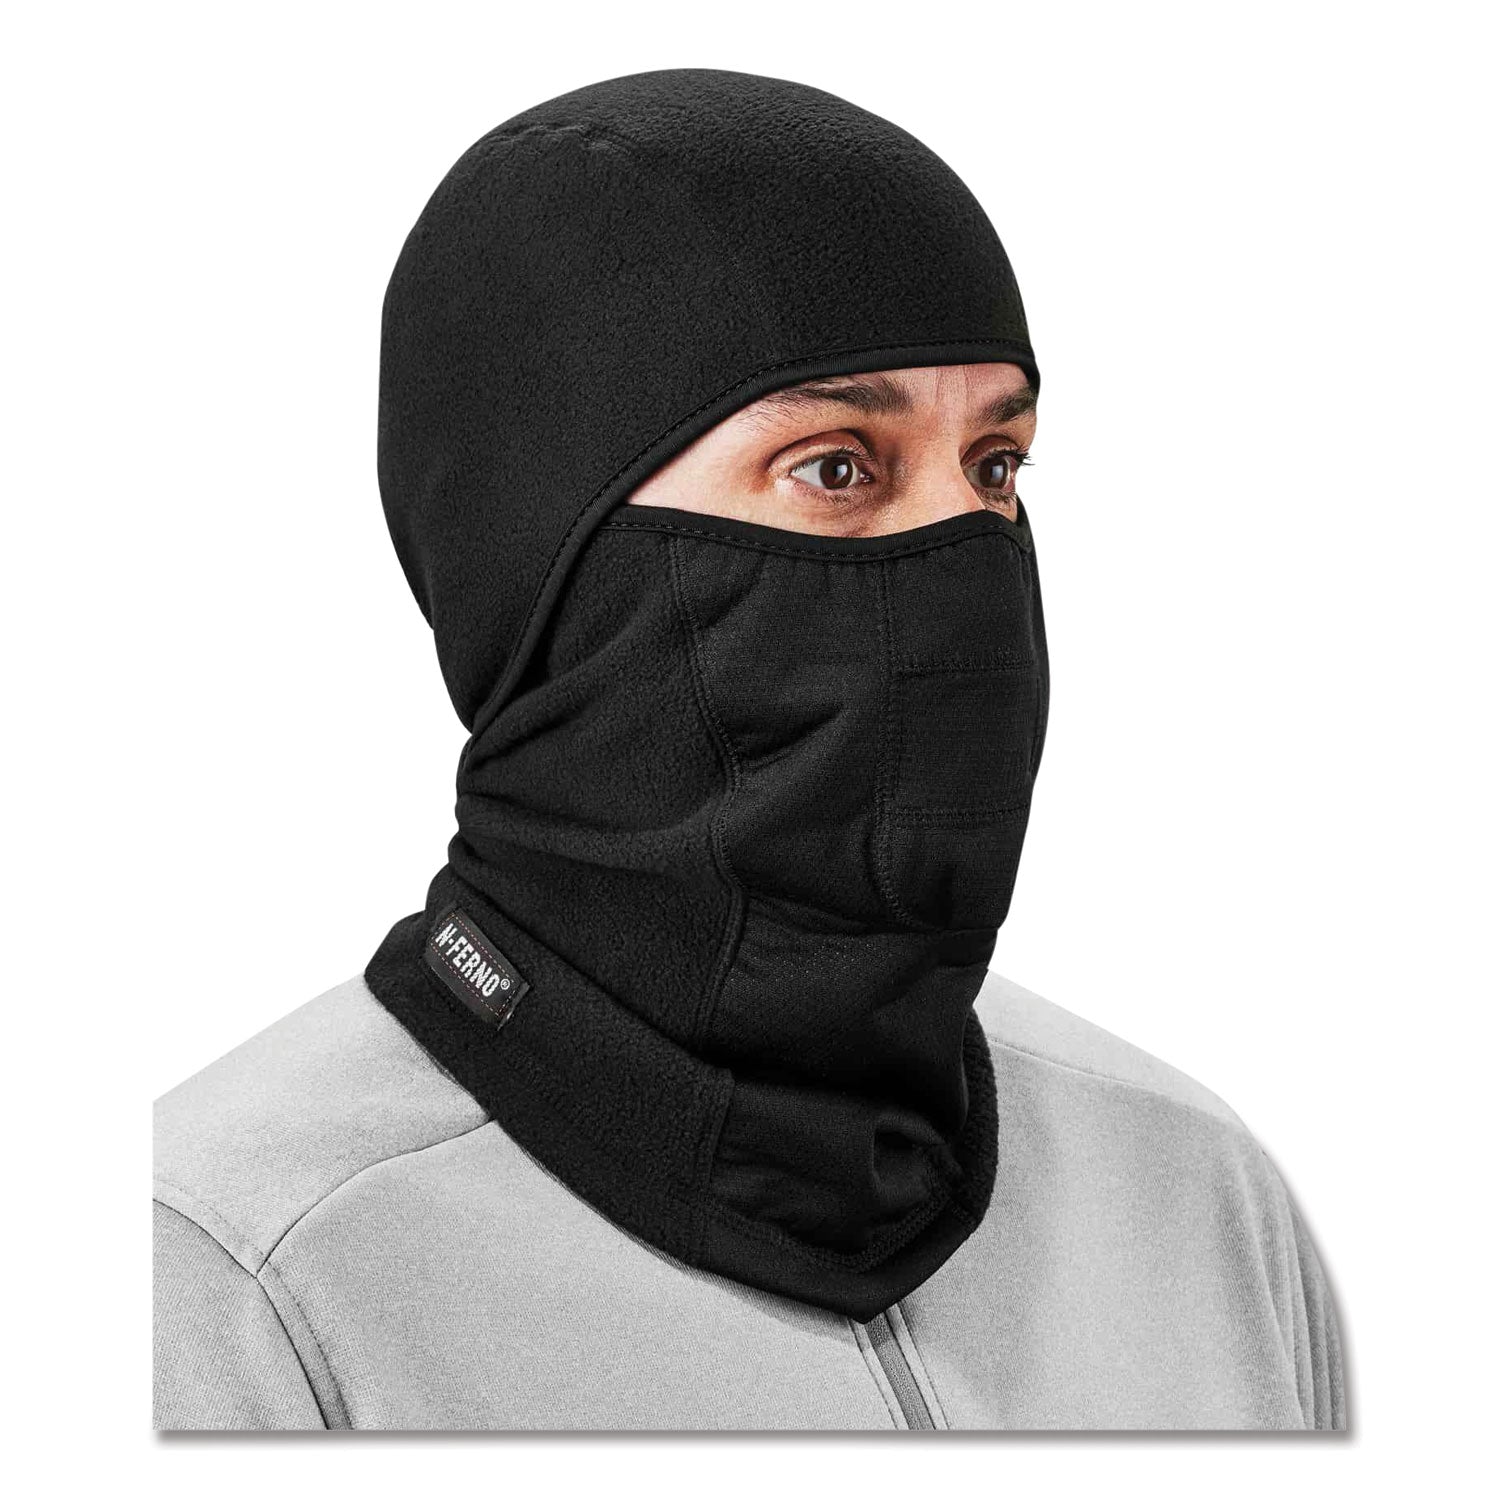 n-ferno-6823-hinged-balaclava-face-mask-fleece-one-size-fits-most-black-ships-in-1-3-business-days_ego16823 - 8